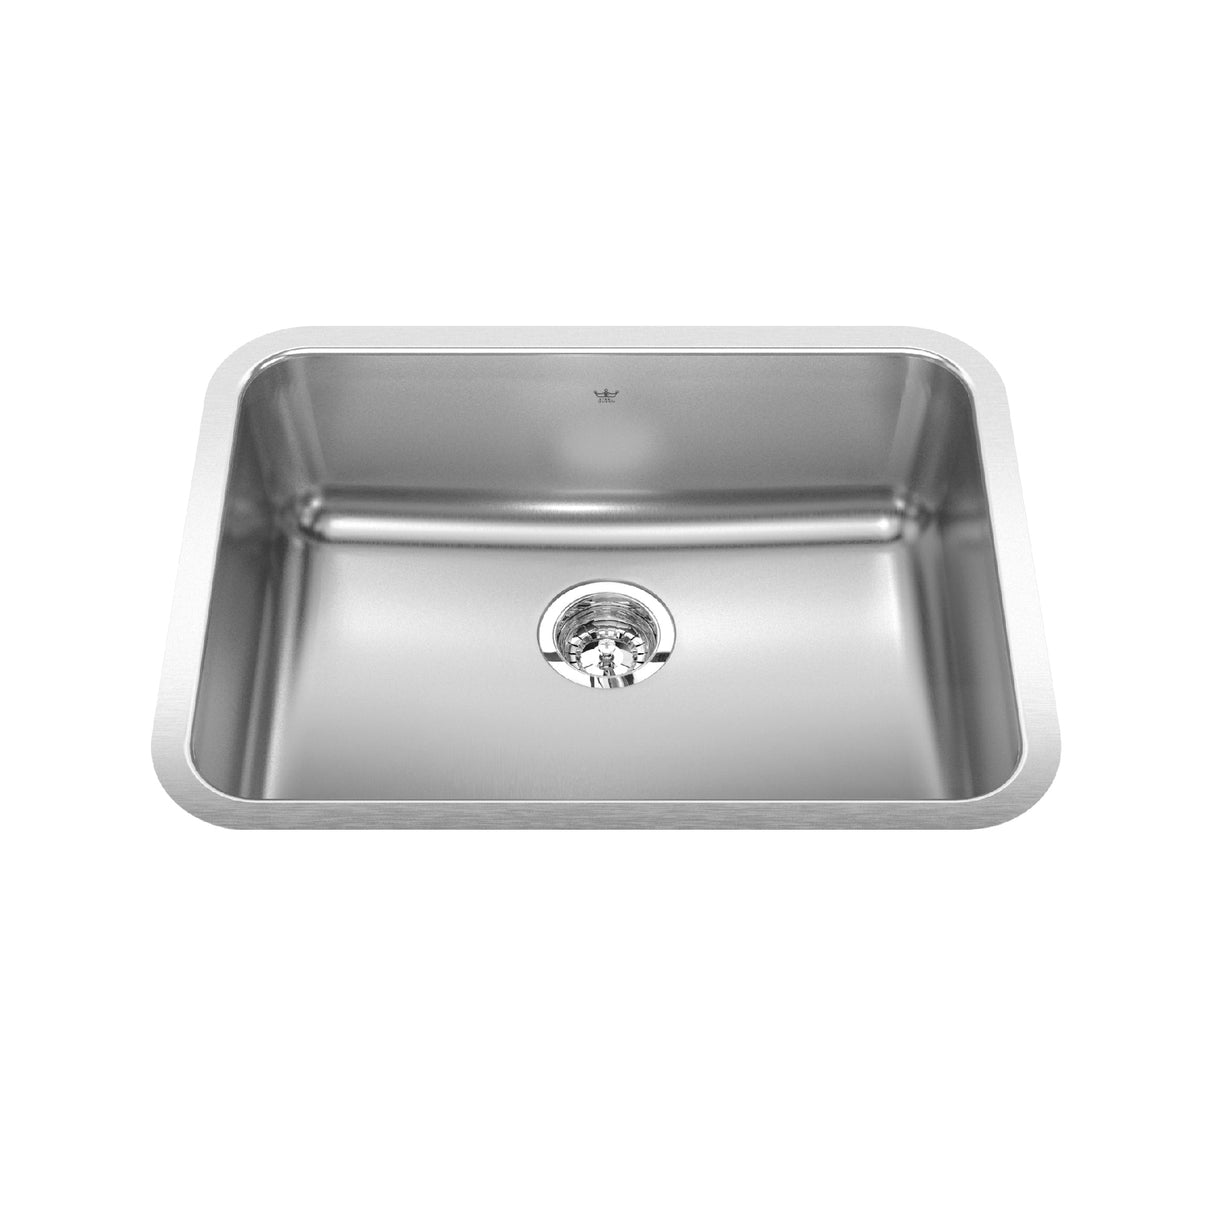 KINDRED QSUA1925-8N Steel Queen 24.75-in LR x 18.75-in FB x 8-in DP Undermount Single Bowl Stainless Steel Kitchen Sink In Satin Finished Bowl with Silk Finished Rim